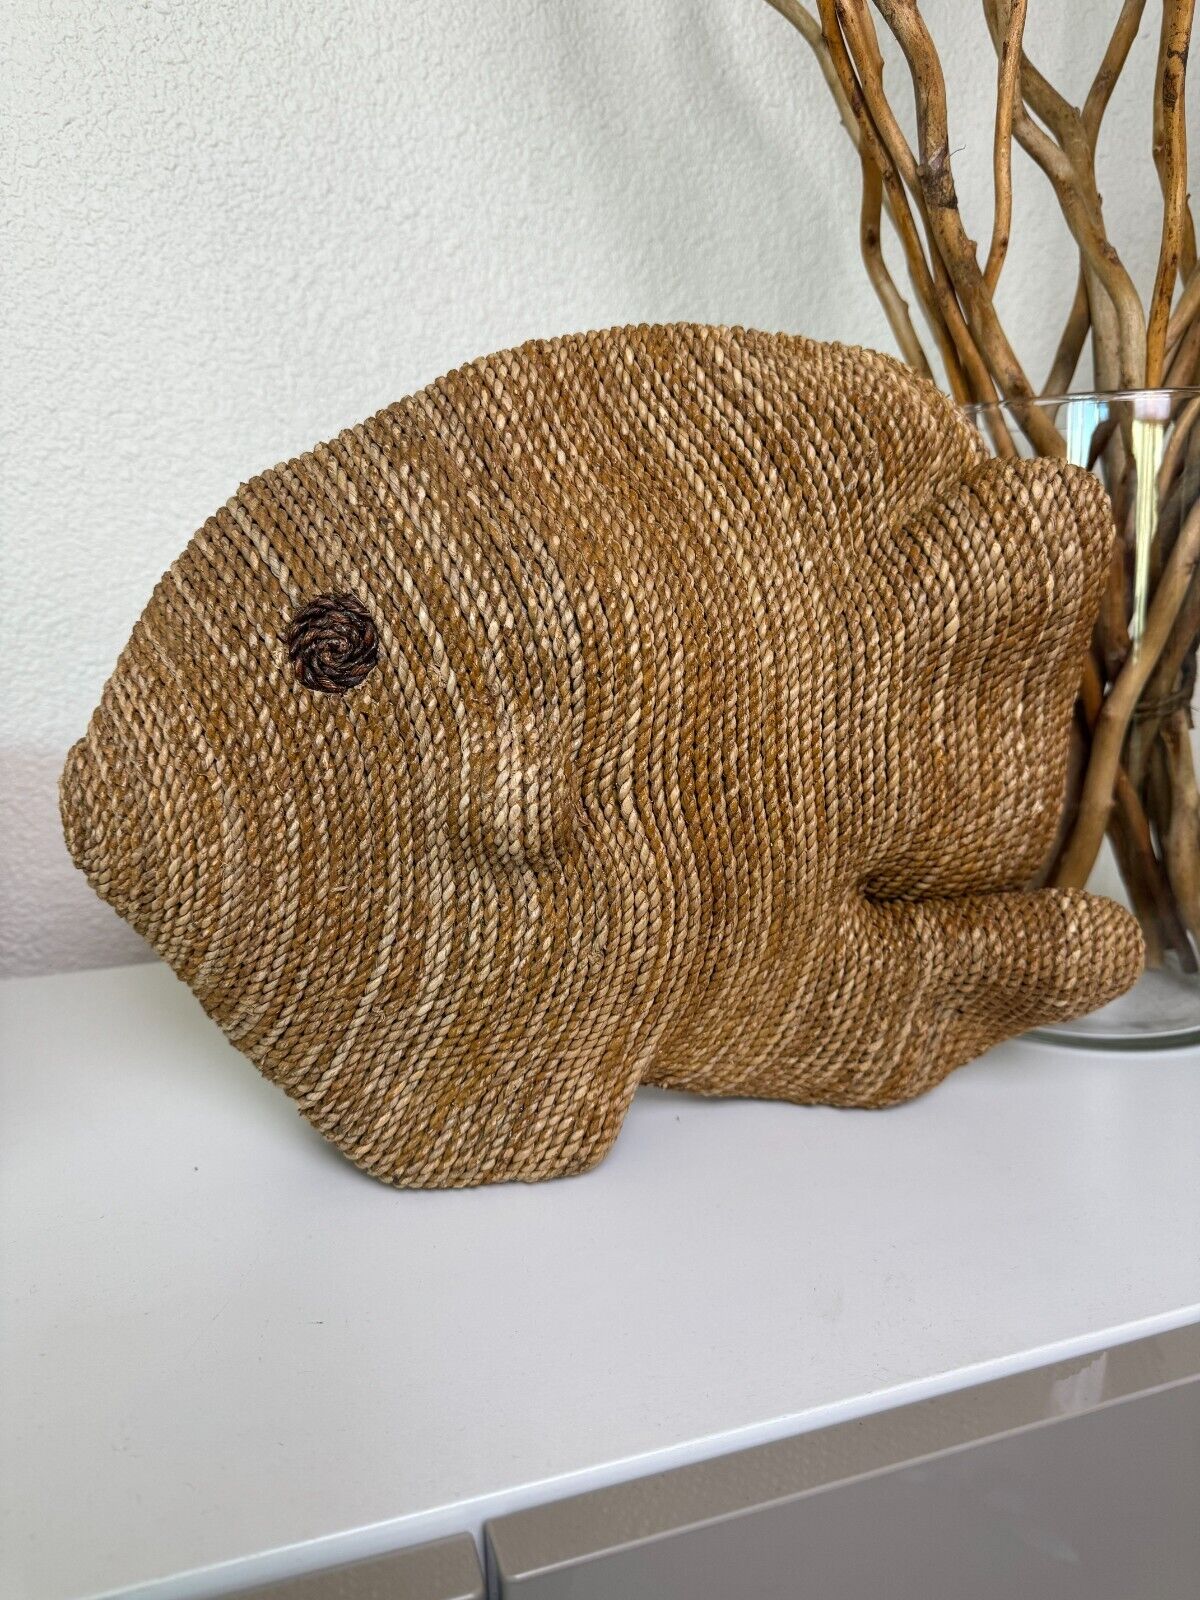 Vintage Fish Home Decor Large Woven Rattan Rope-Look Lightweight 10